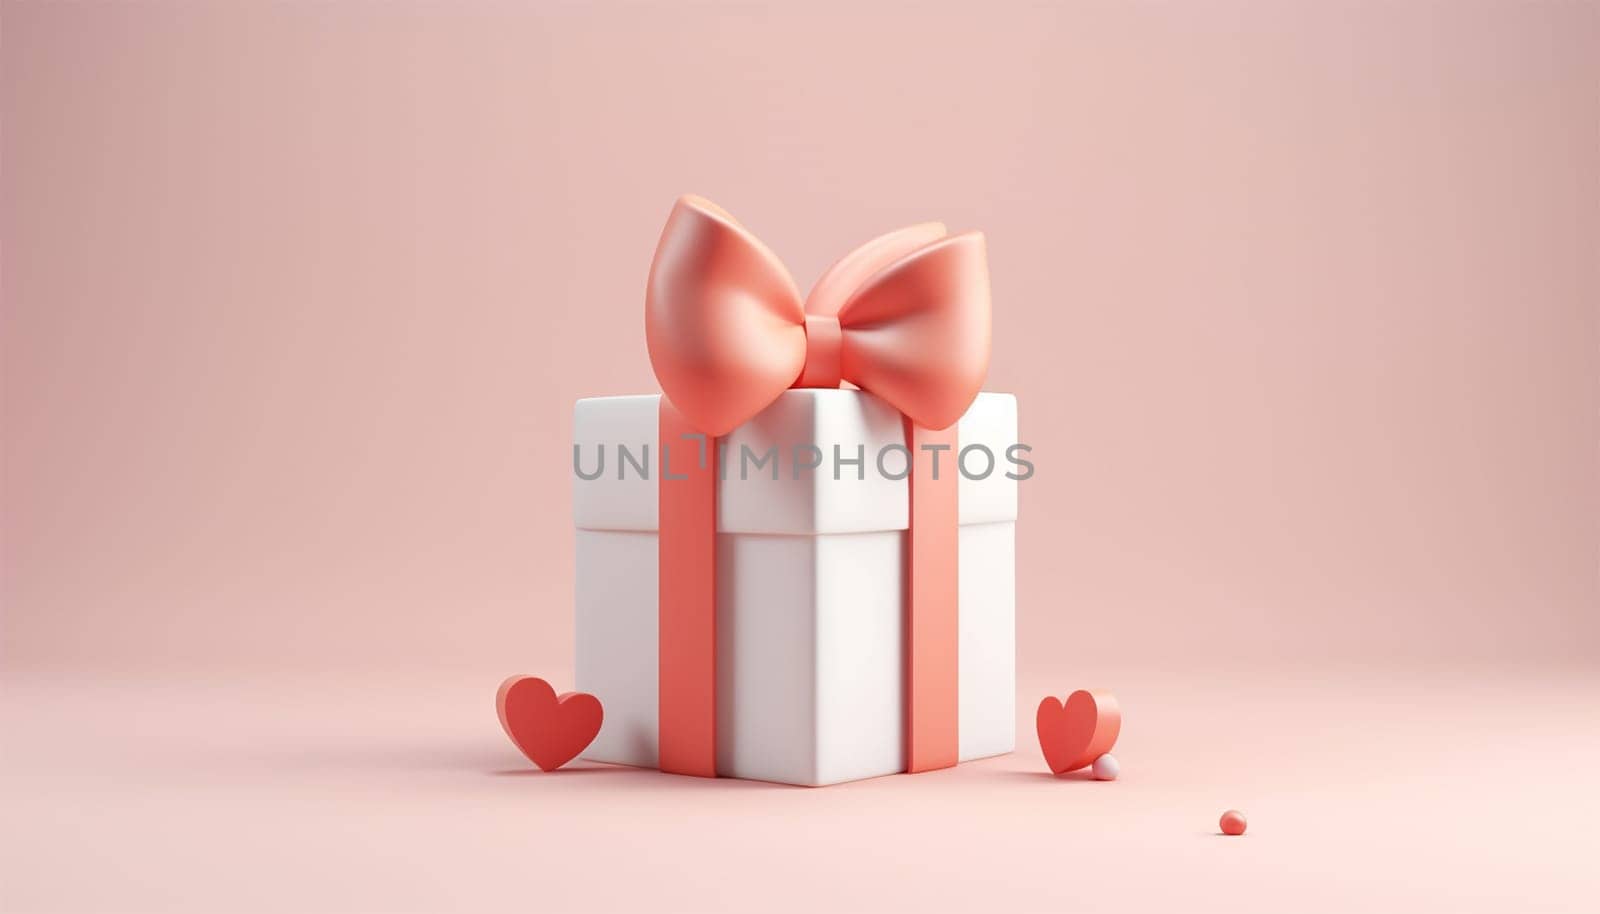 Valentine's day design. Realistic red gifts boxes. Open gift box full of decorative festive object. Holiday banner, web poster, flyer, stylish brochure, greeting card, cover. Romantic background Pastel pink design copy space by Annebel146